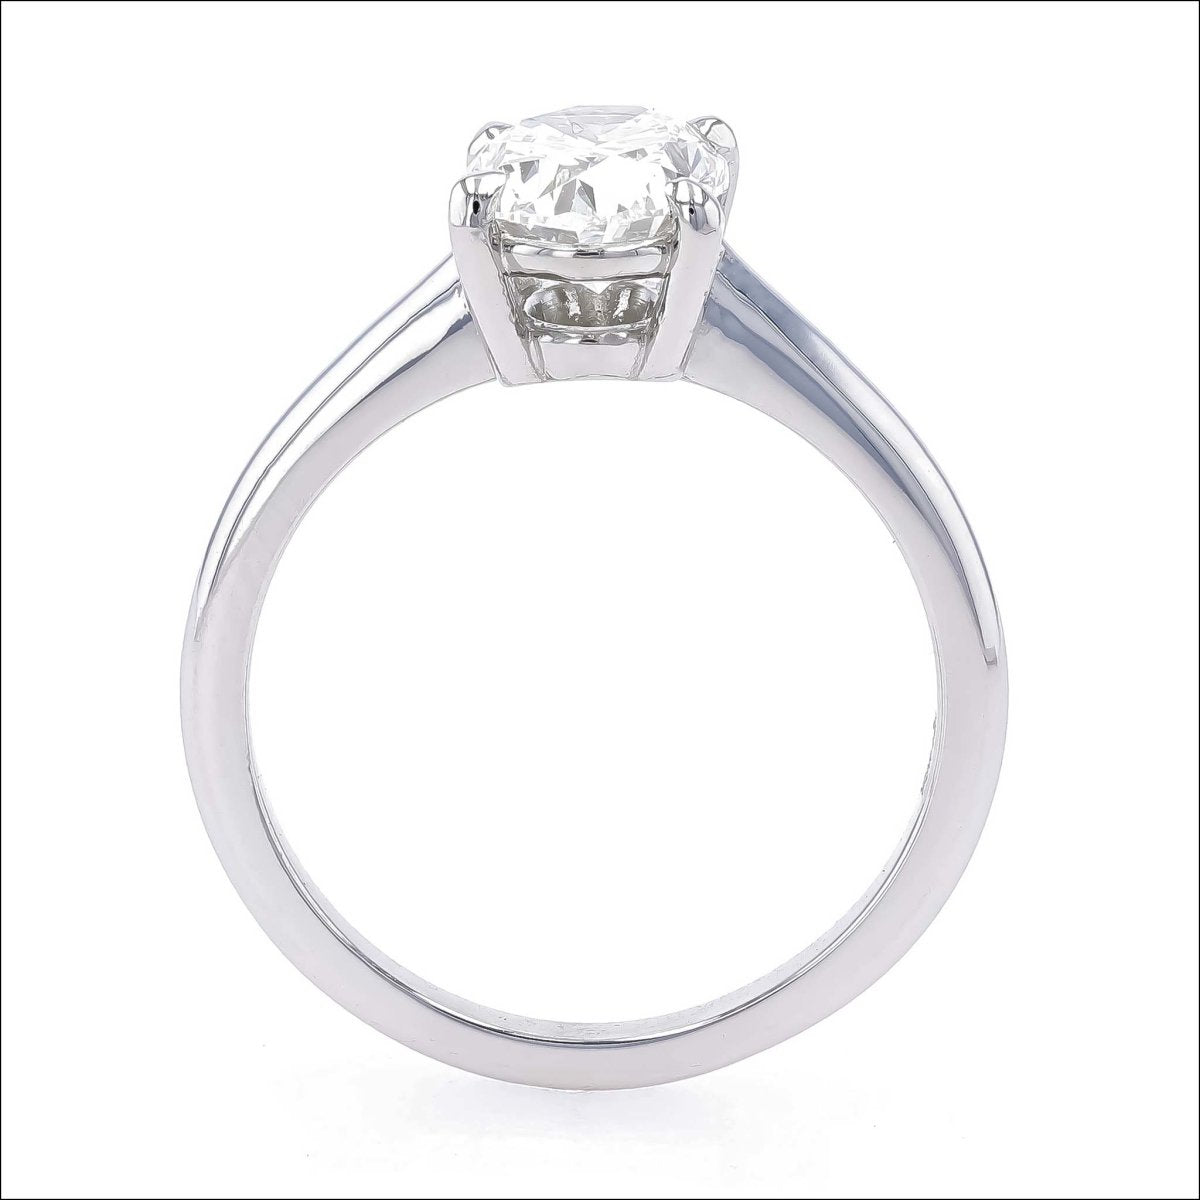 Oval Diamond Engagement Ring Solitaire Platinum 1.70ct - JewelsmithEngagement Rings